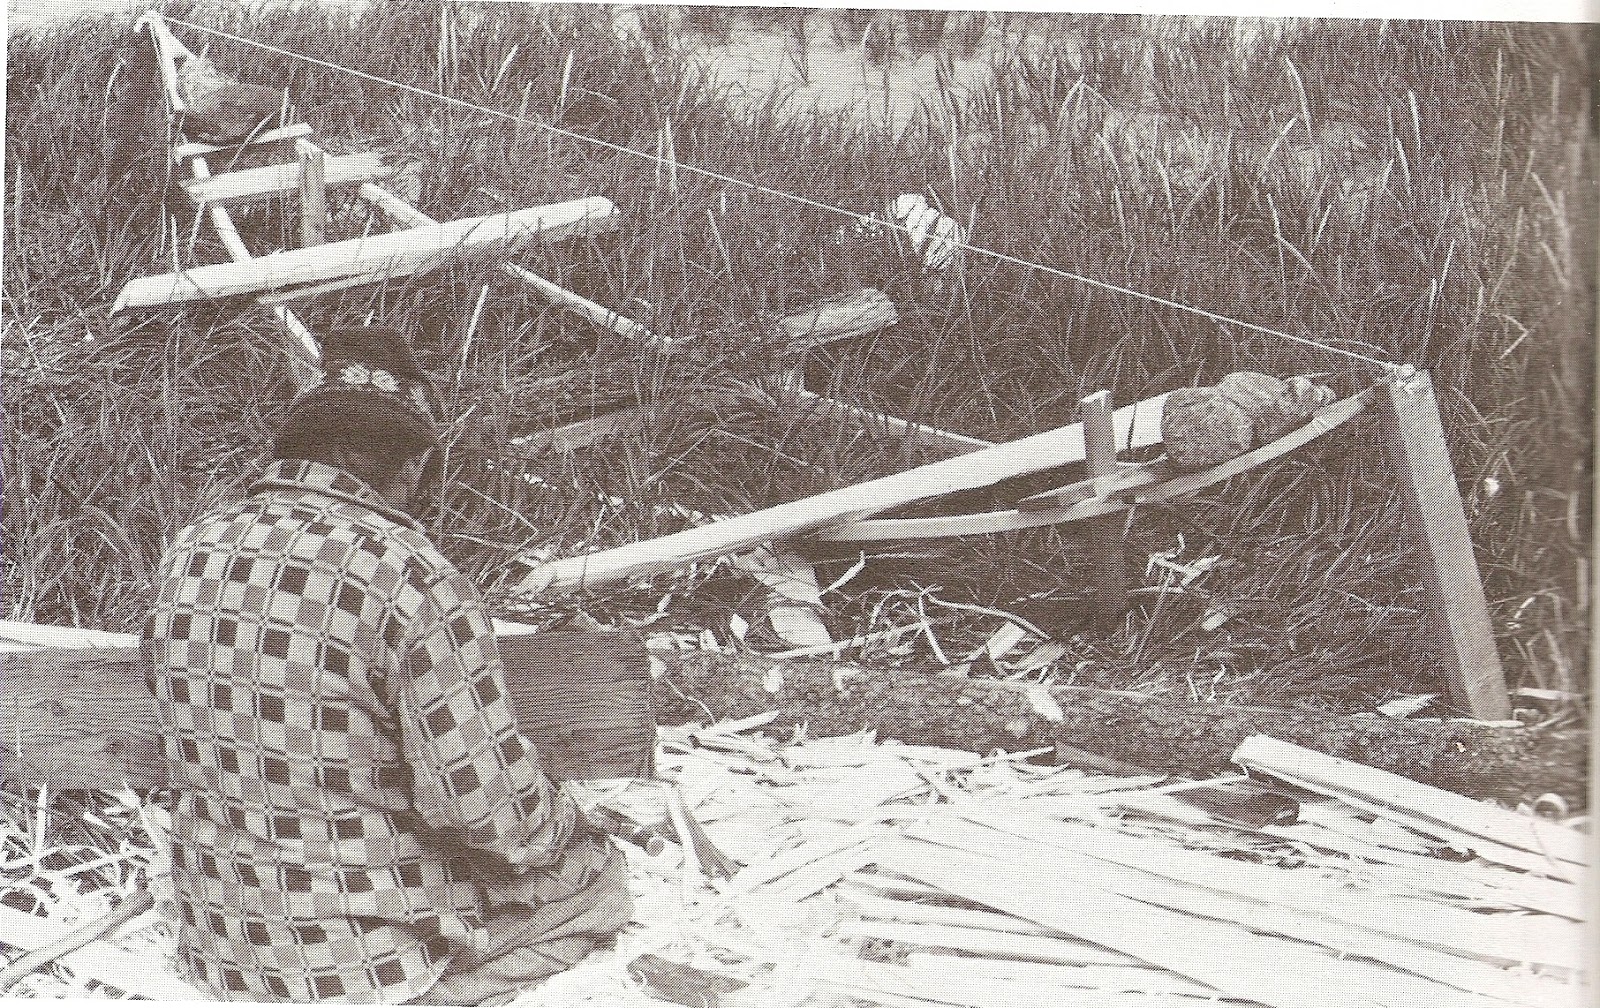  From Canoe Construction in a Cree Cultural Tradition by J Garth Taylor